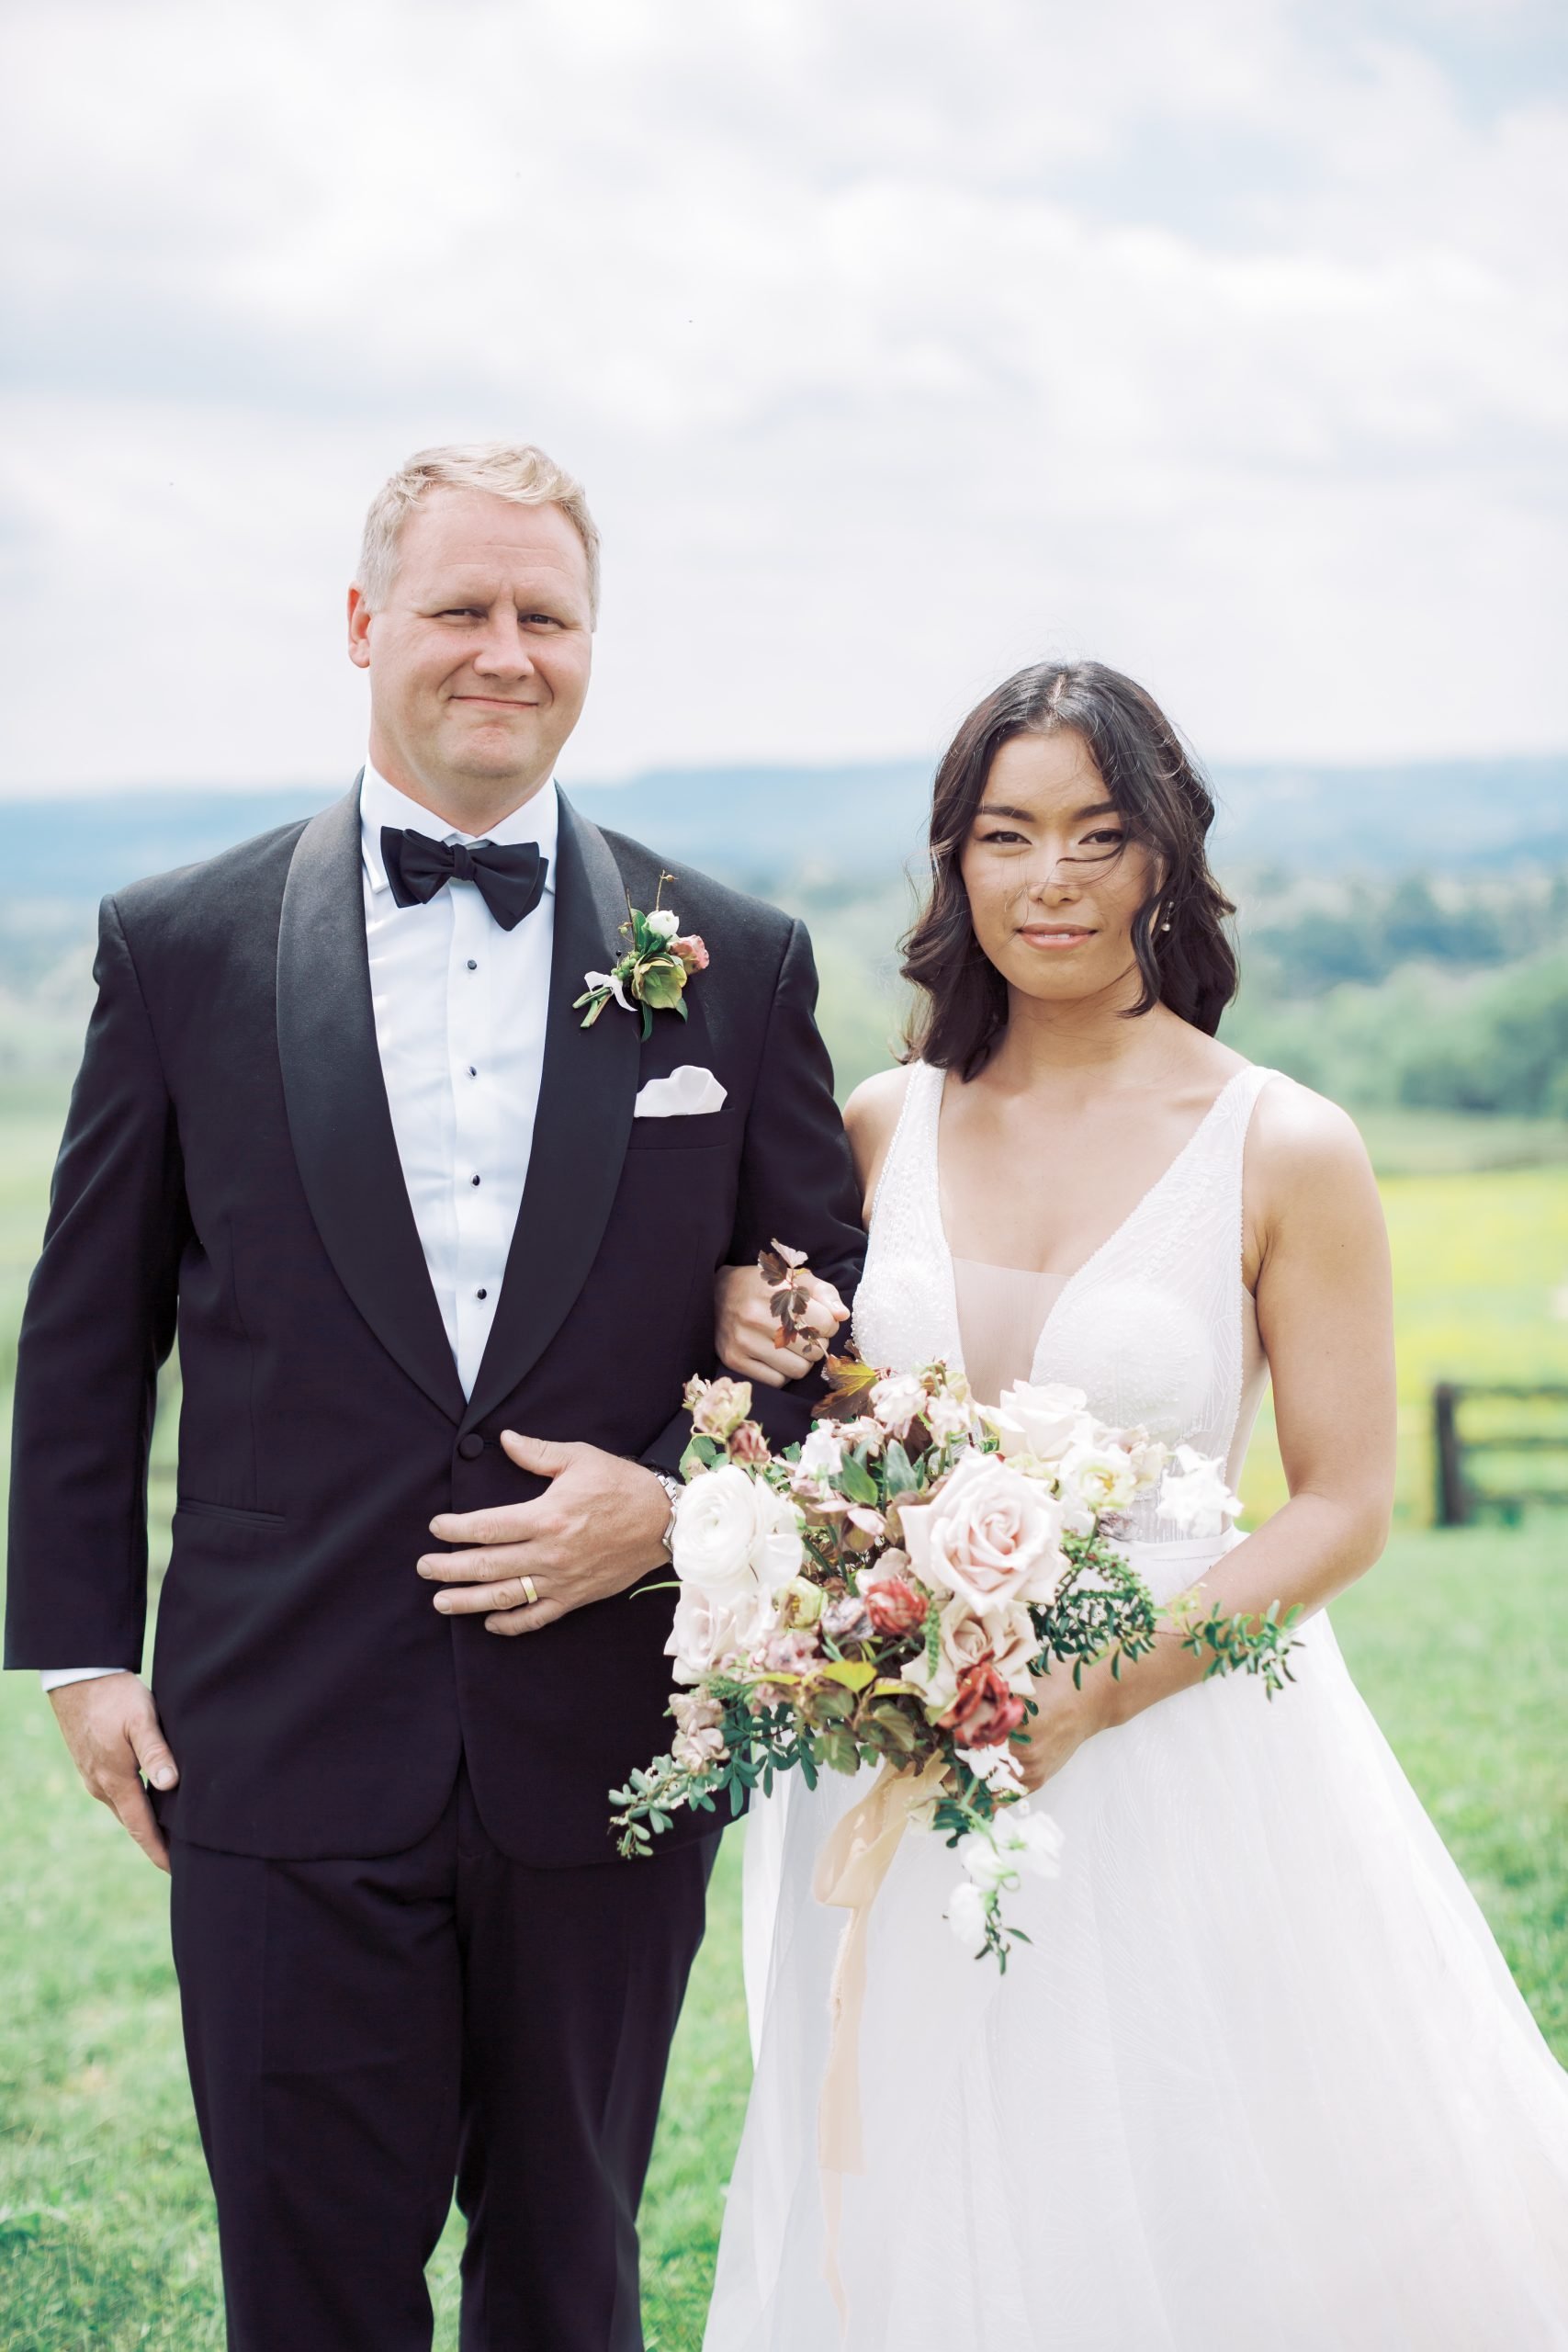 A Joyful, Intimate, and Elegant Styled Elopement at Lauxmont Farms